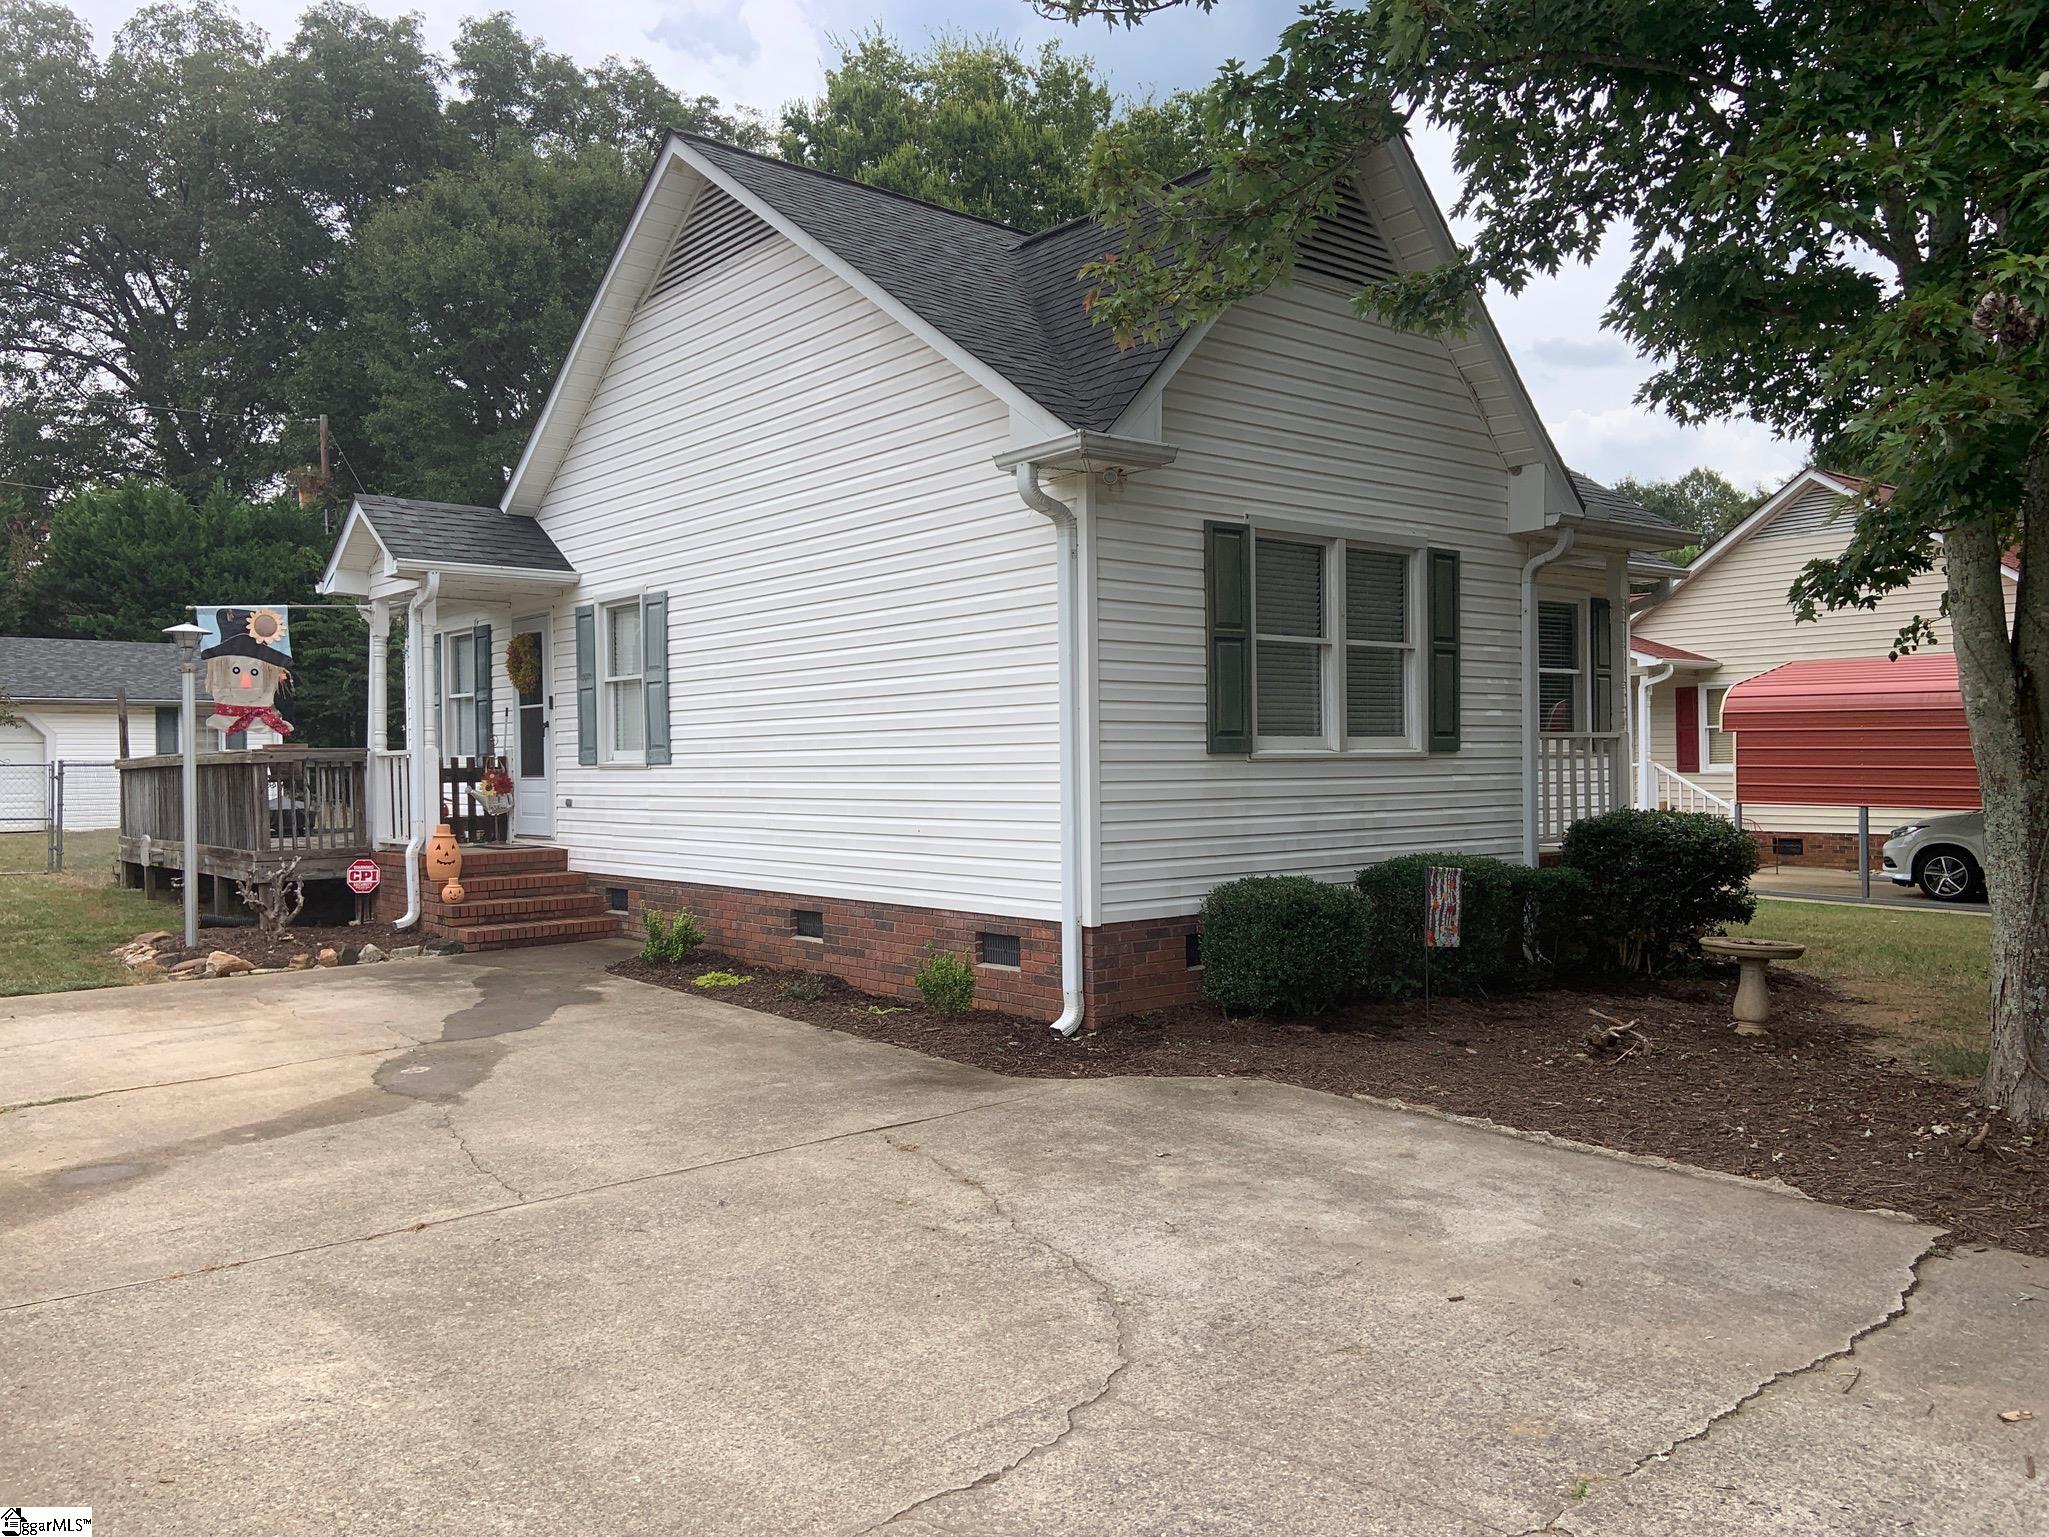 Two bedrooms one bath home with a detached garage with electrical! It is located on a dead-end street in Williamston! This well-maintained home is close to Main Street,  Mineral Spring Park, and the Palmetto Schools.